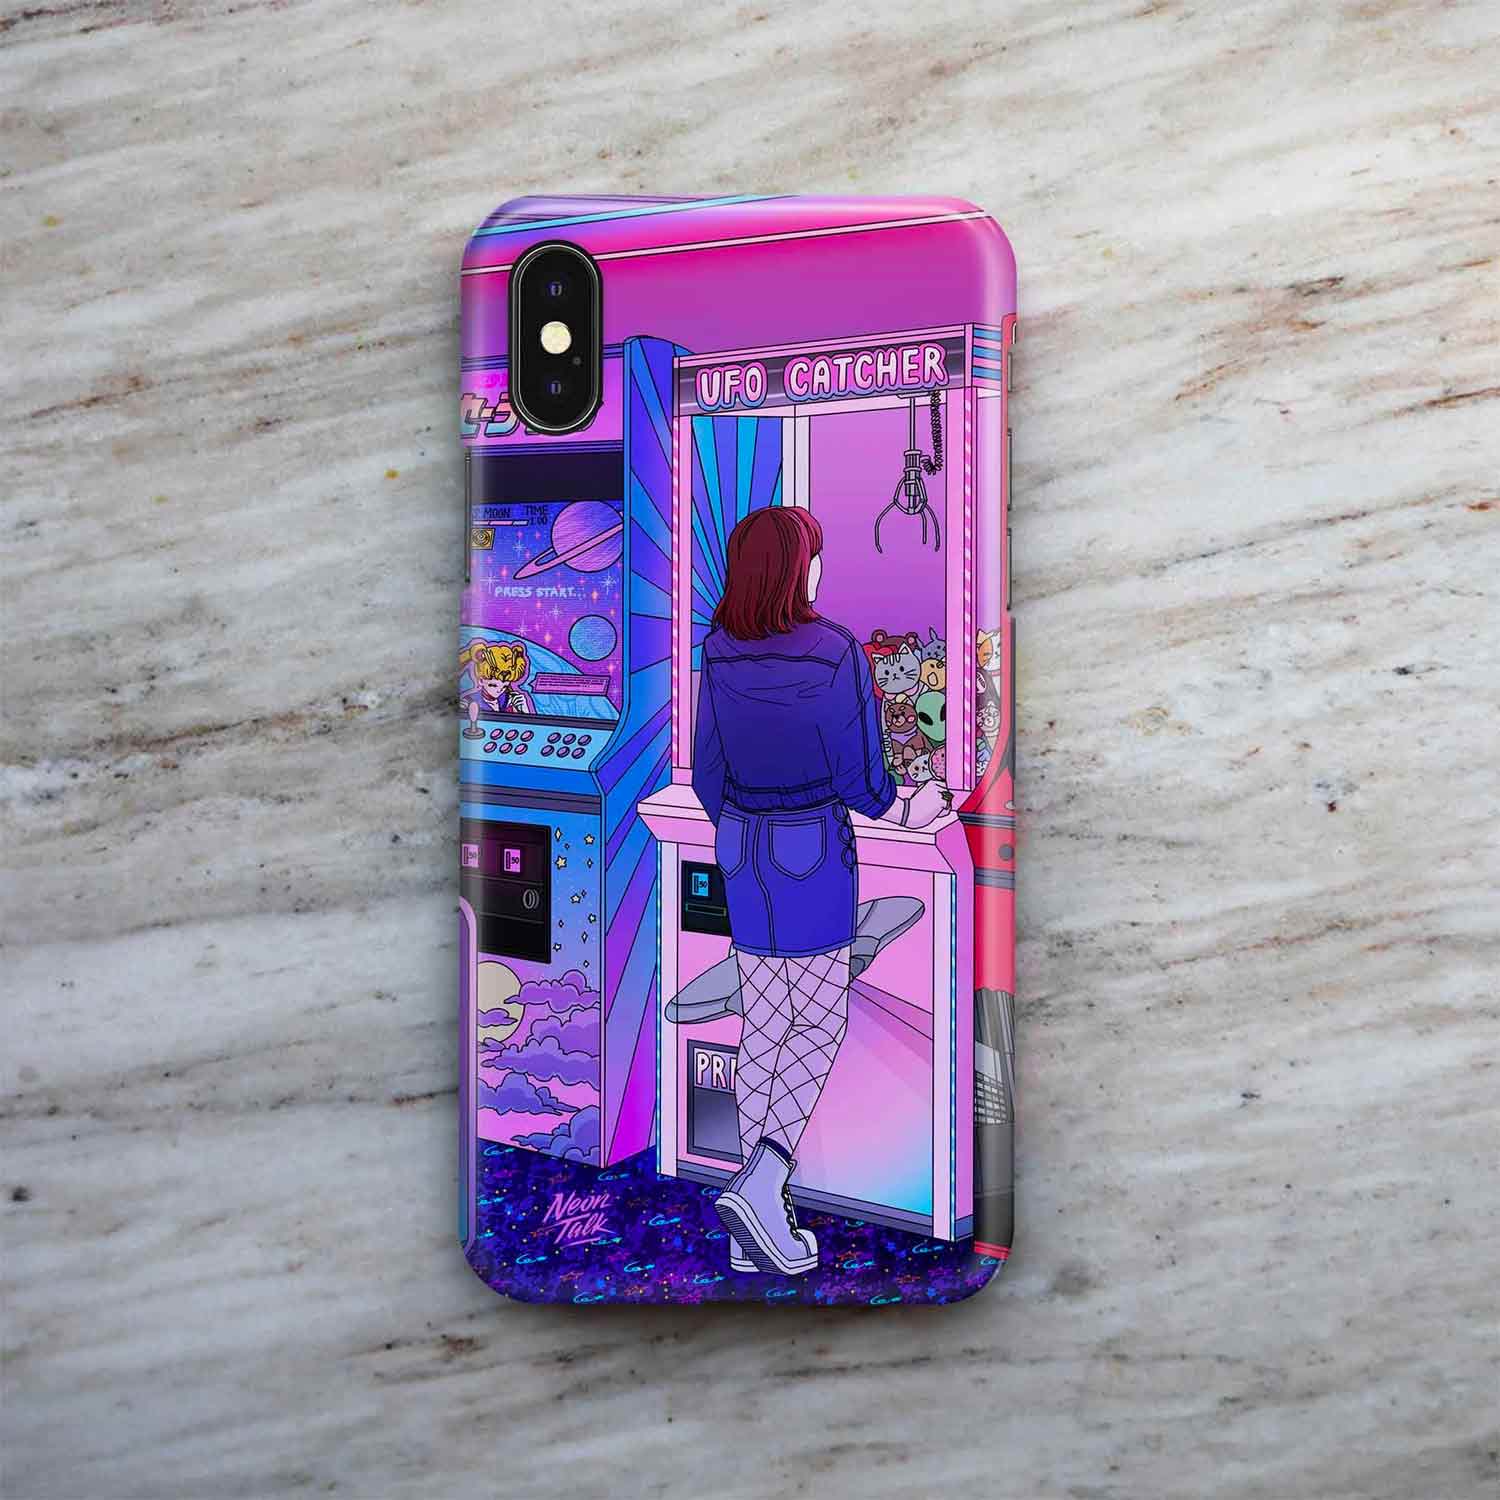 Anime Manga Panel Collage Phone Case For iPhone and Android | eBay